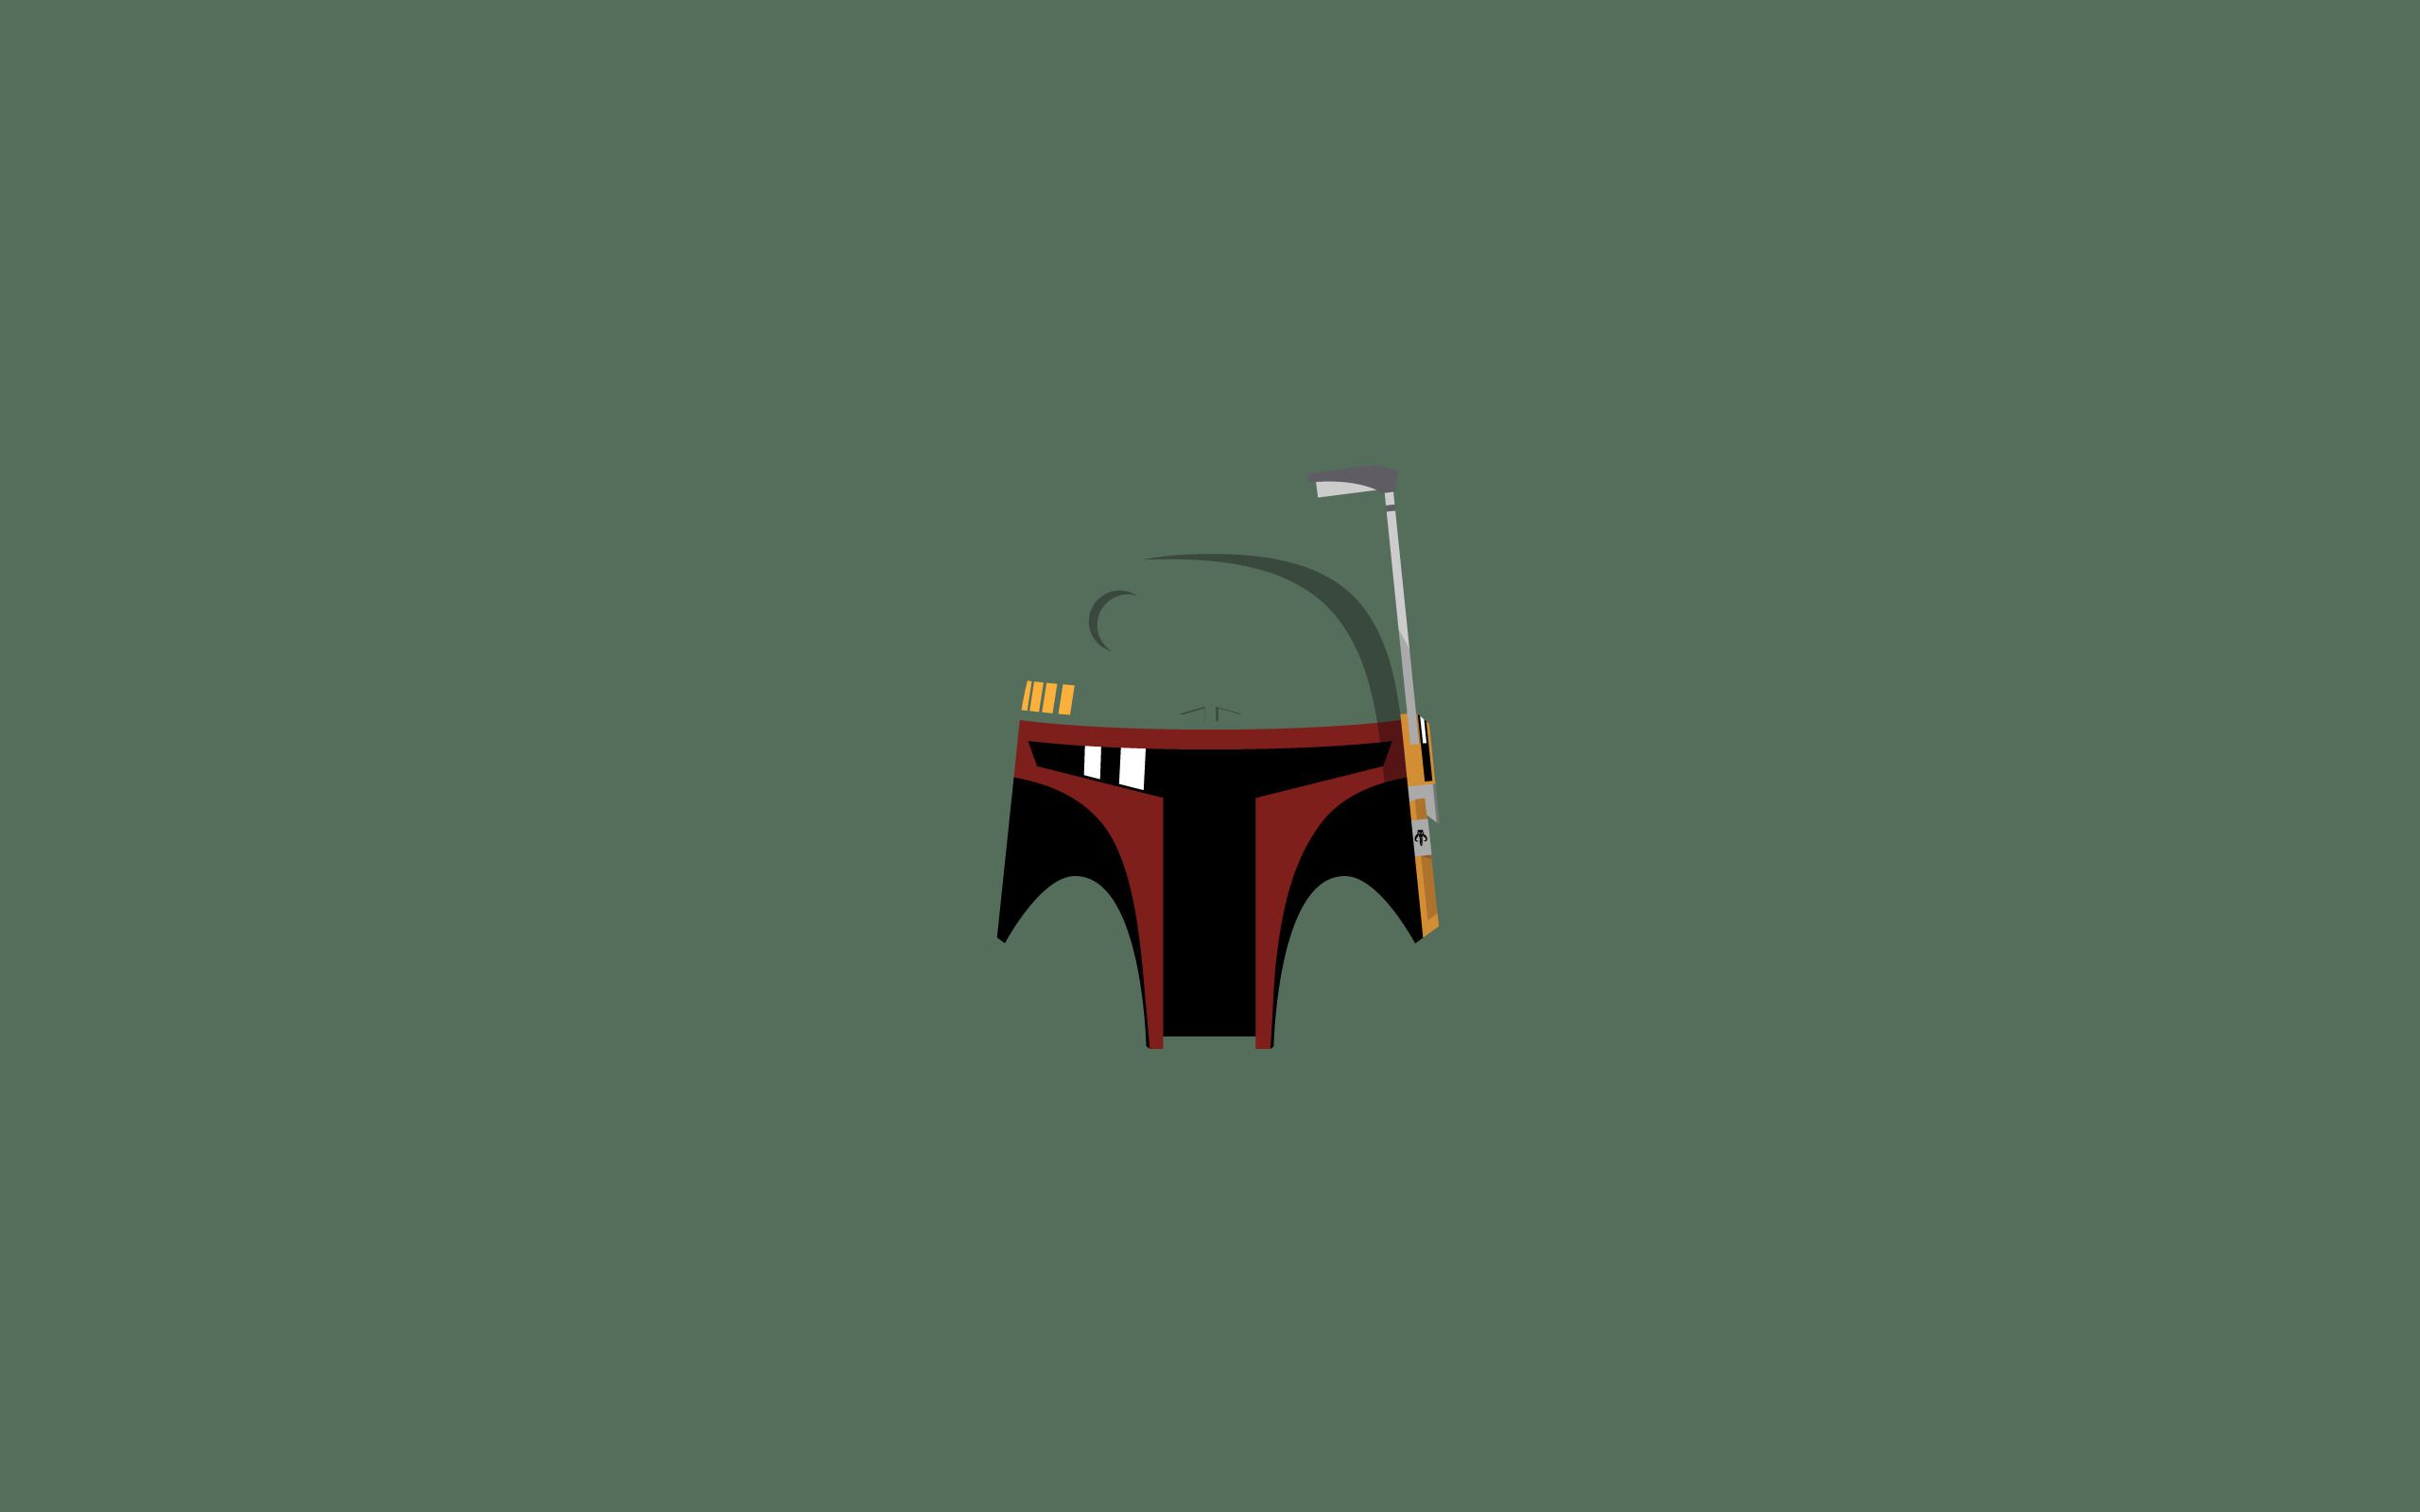 The boba fett helmet is shown on a green background - Boba